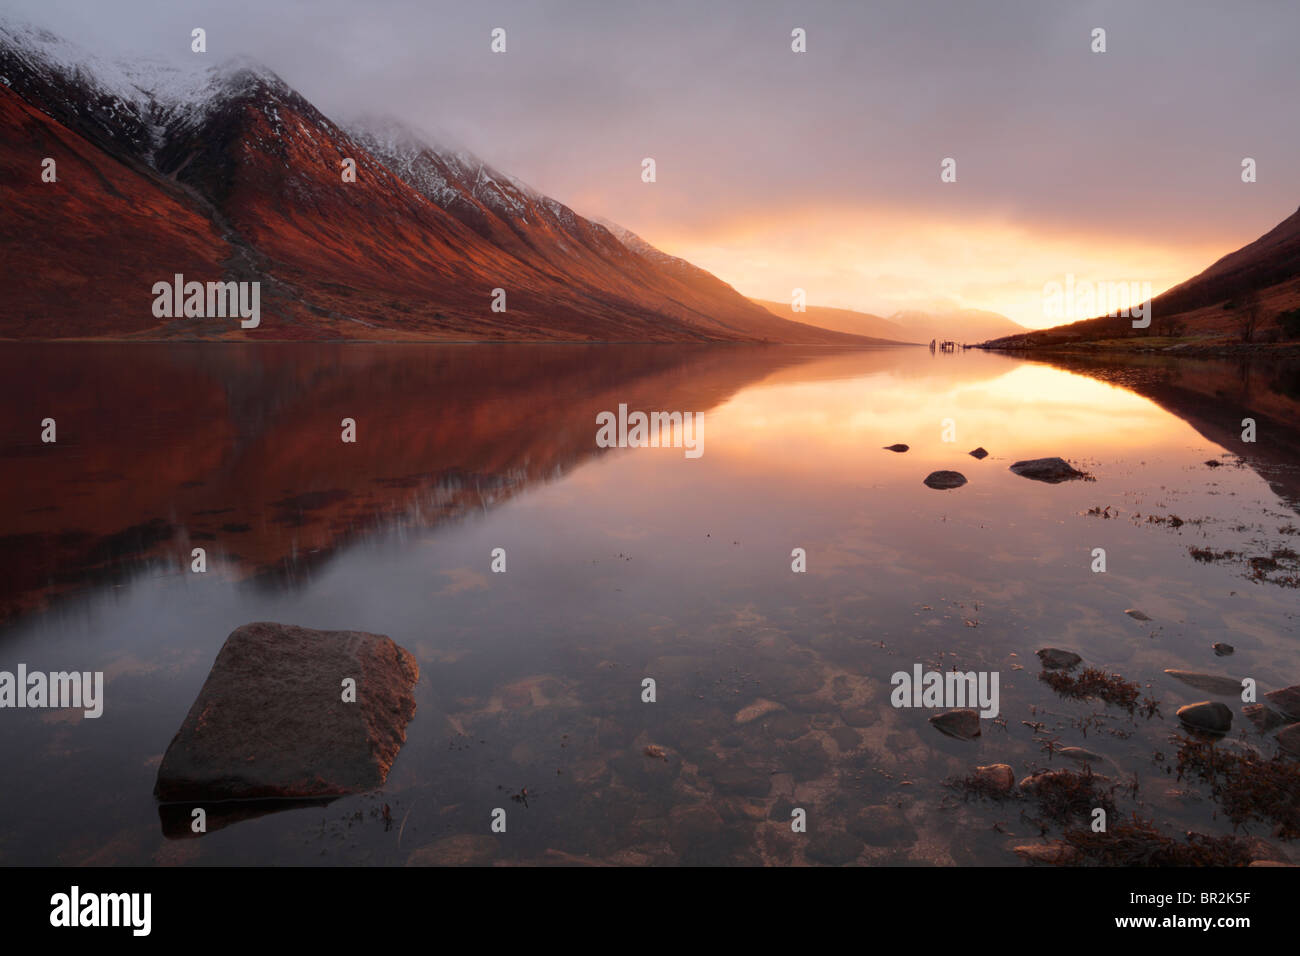 Blazing light from a winter sunset lights up Loch Etive in the Highlands of Scotland Stock Photo